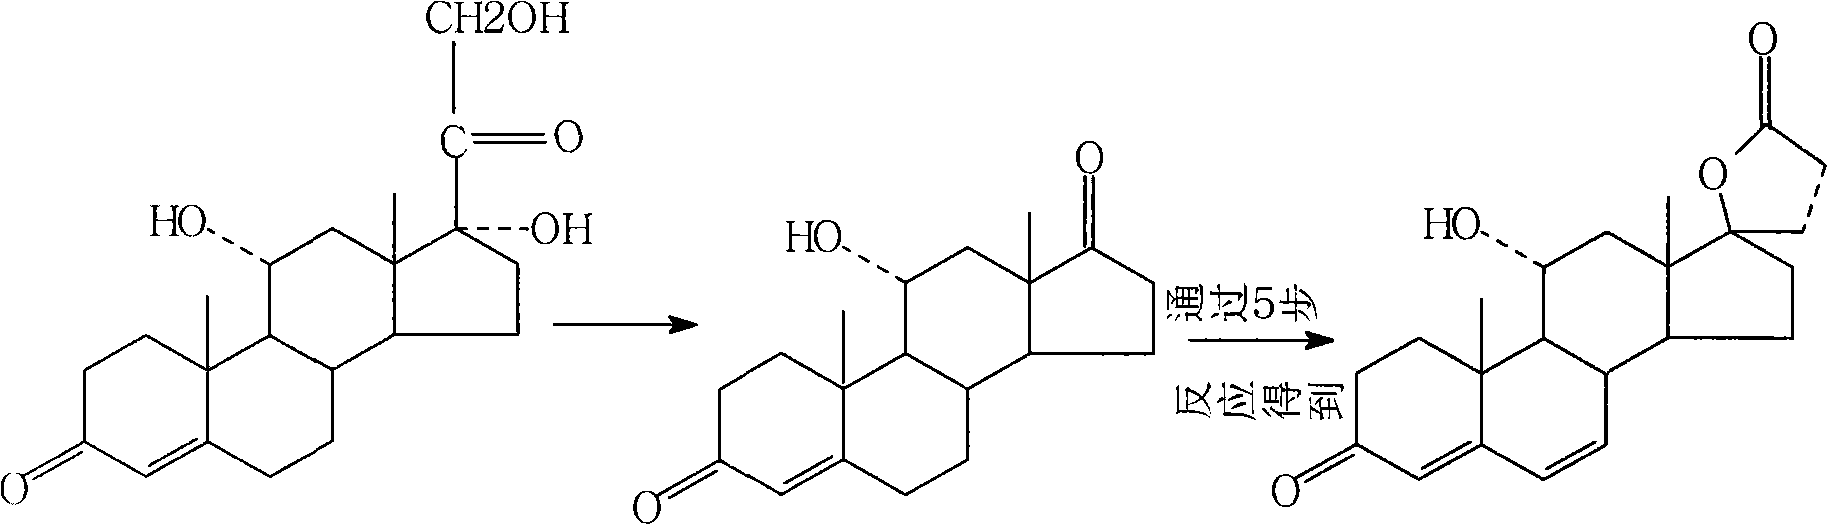 Synthetic method of 11alpha hydroxy-canrenone